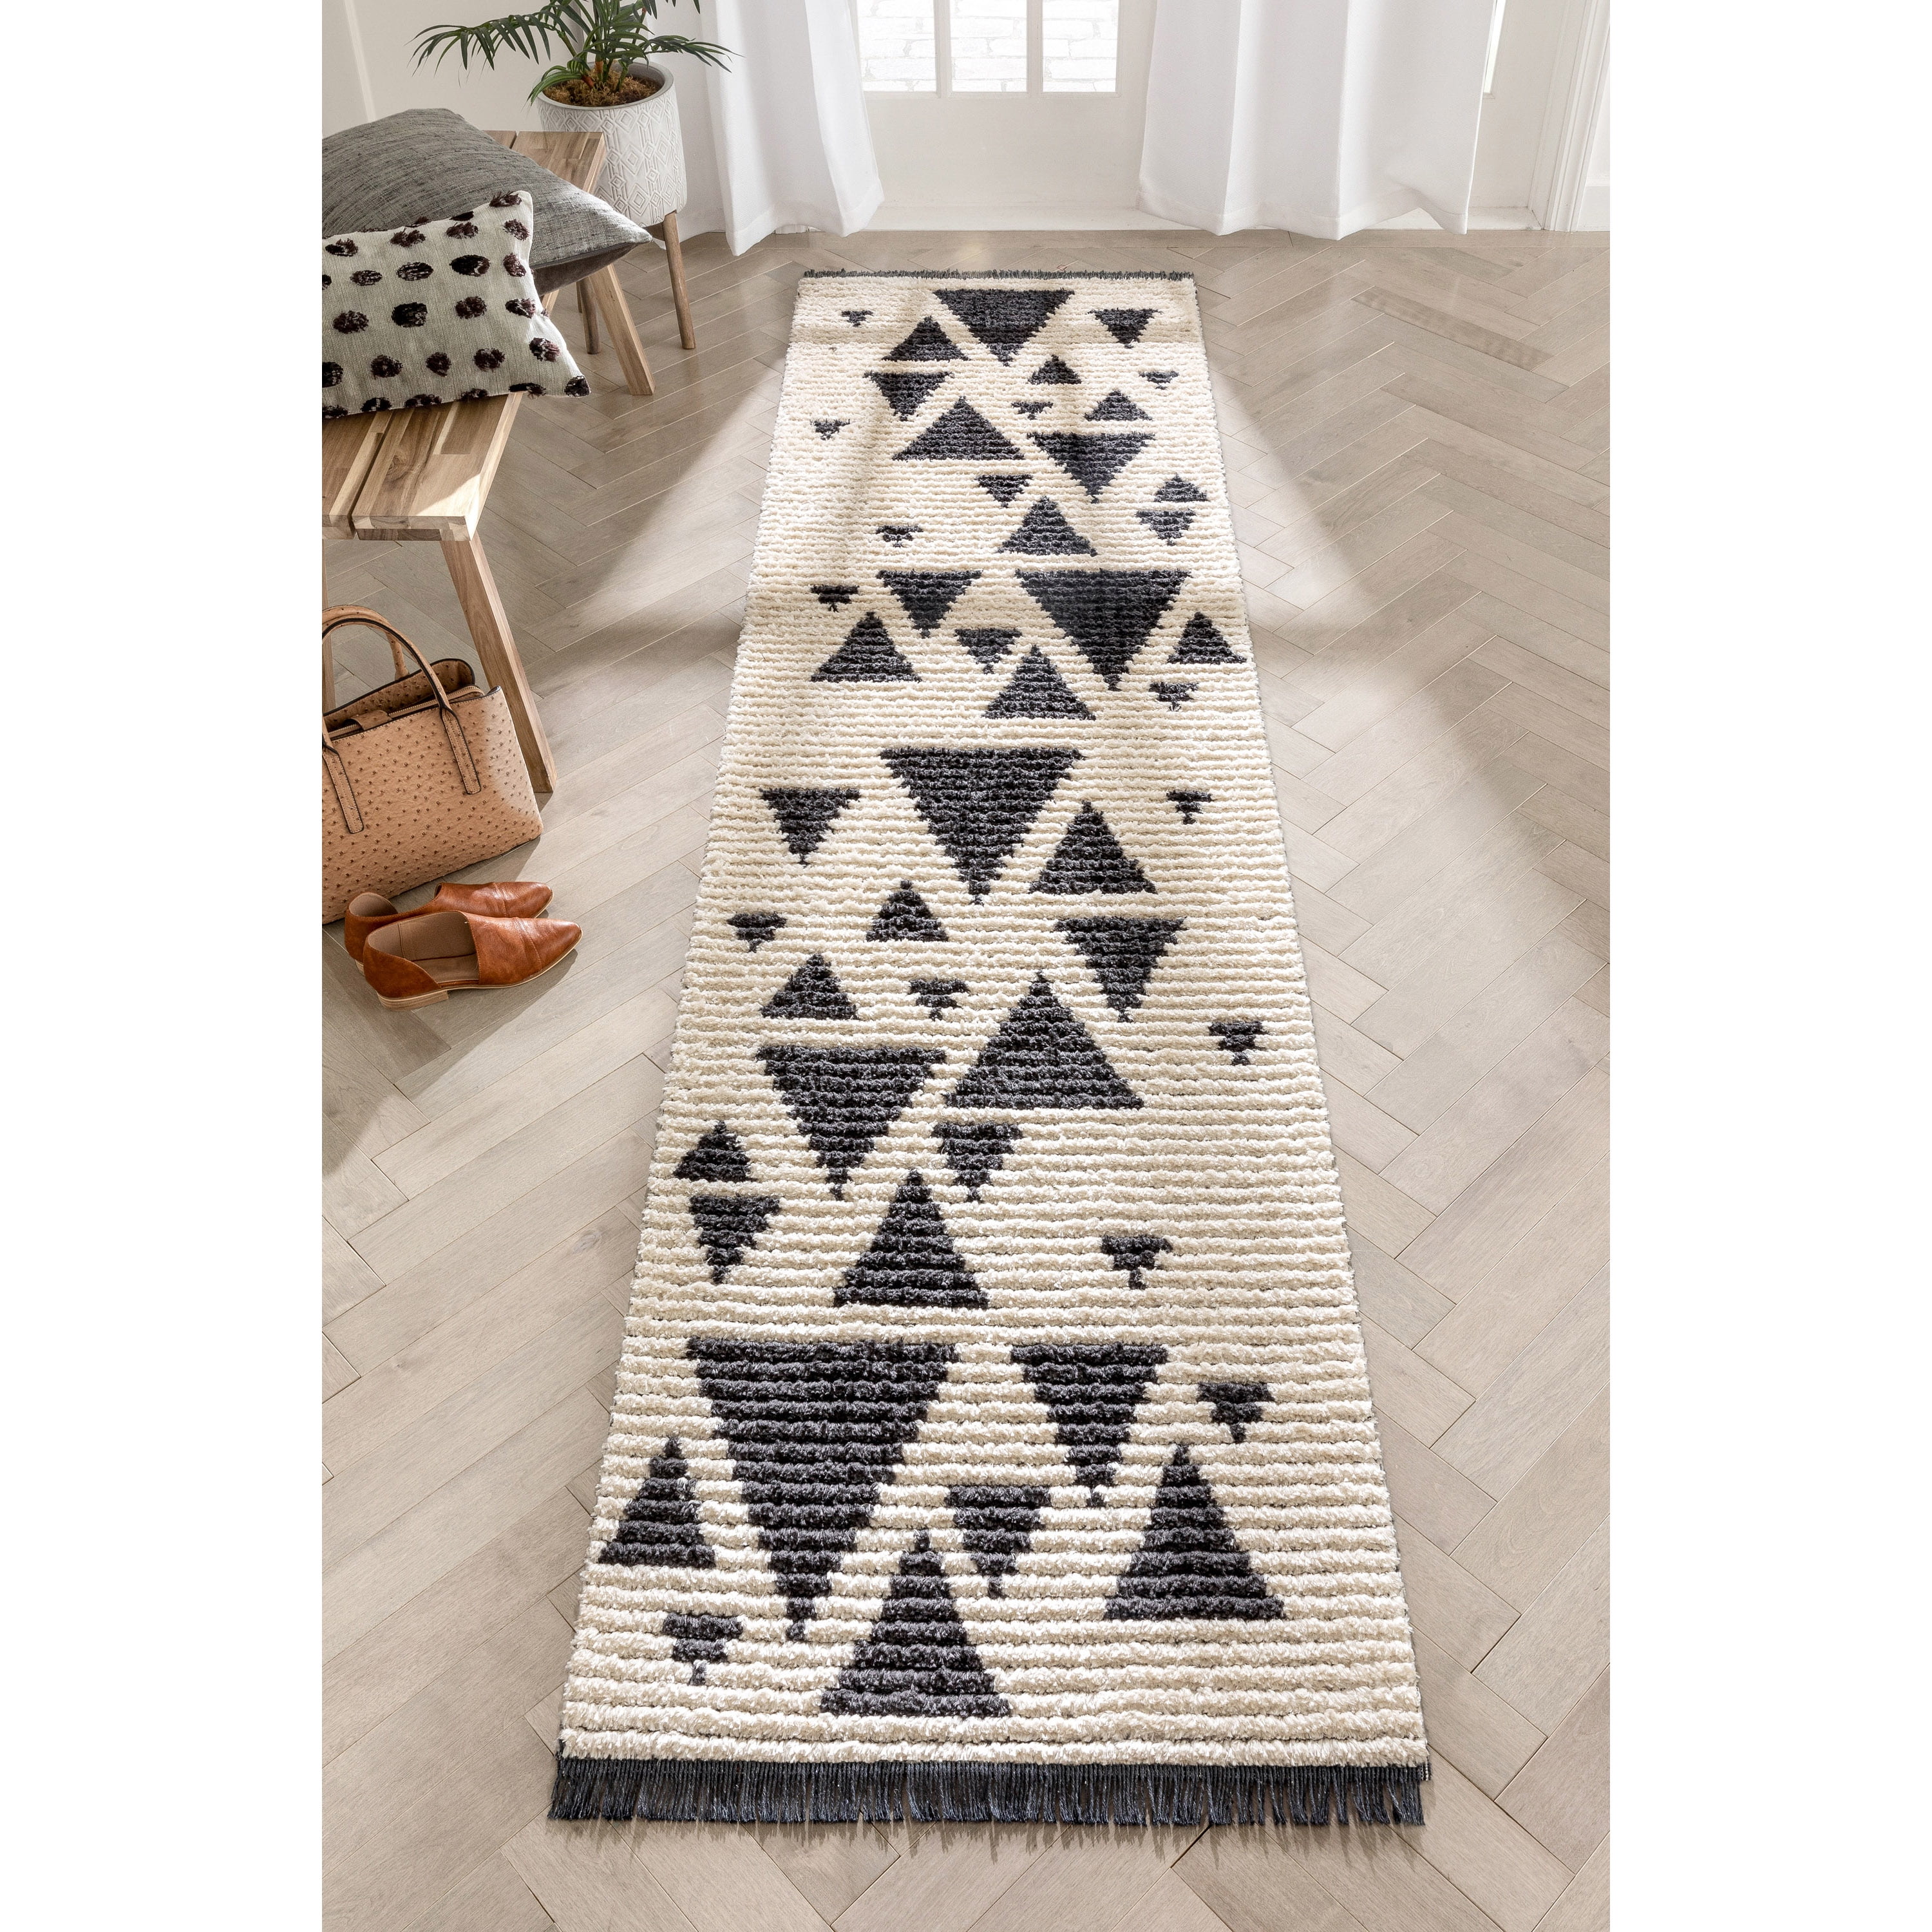 2’ x 3’ Ivory and Magenta Tribal Pattern Scatter Rug